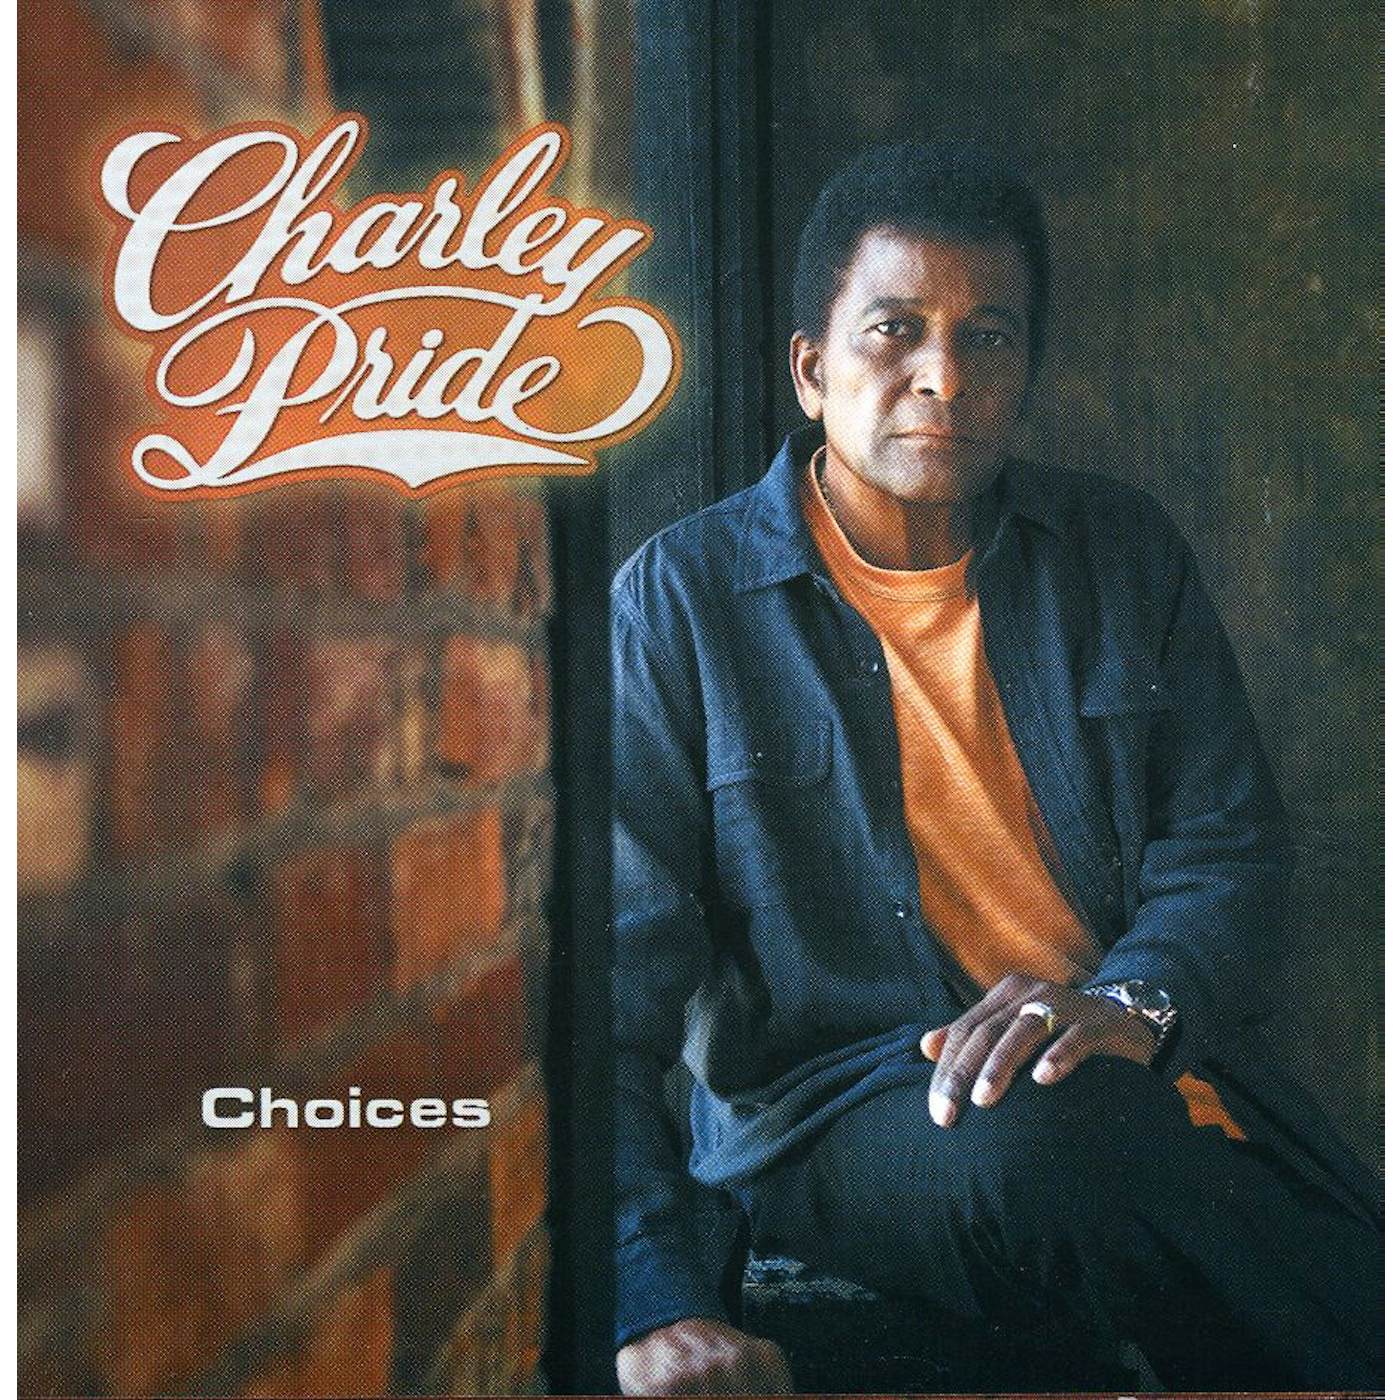 Charley Pride CHOICES CD